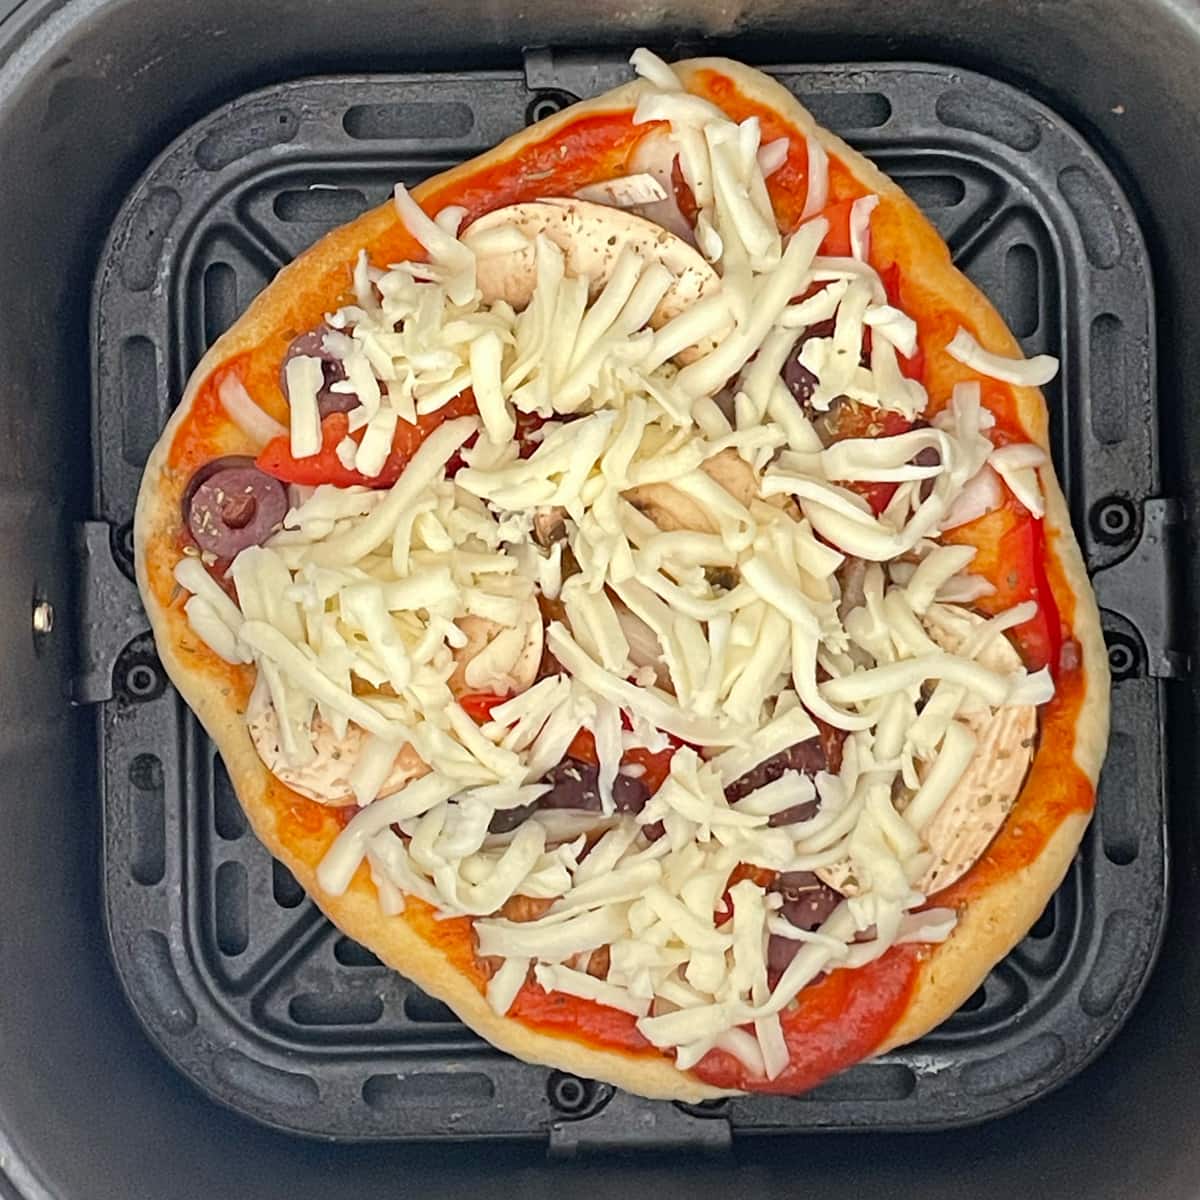 Pizza base with all toppings ready to bake.